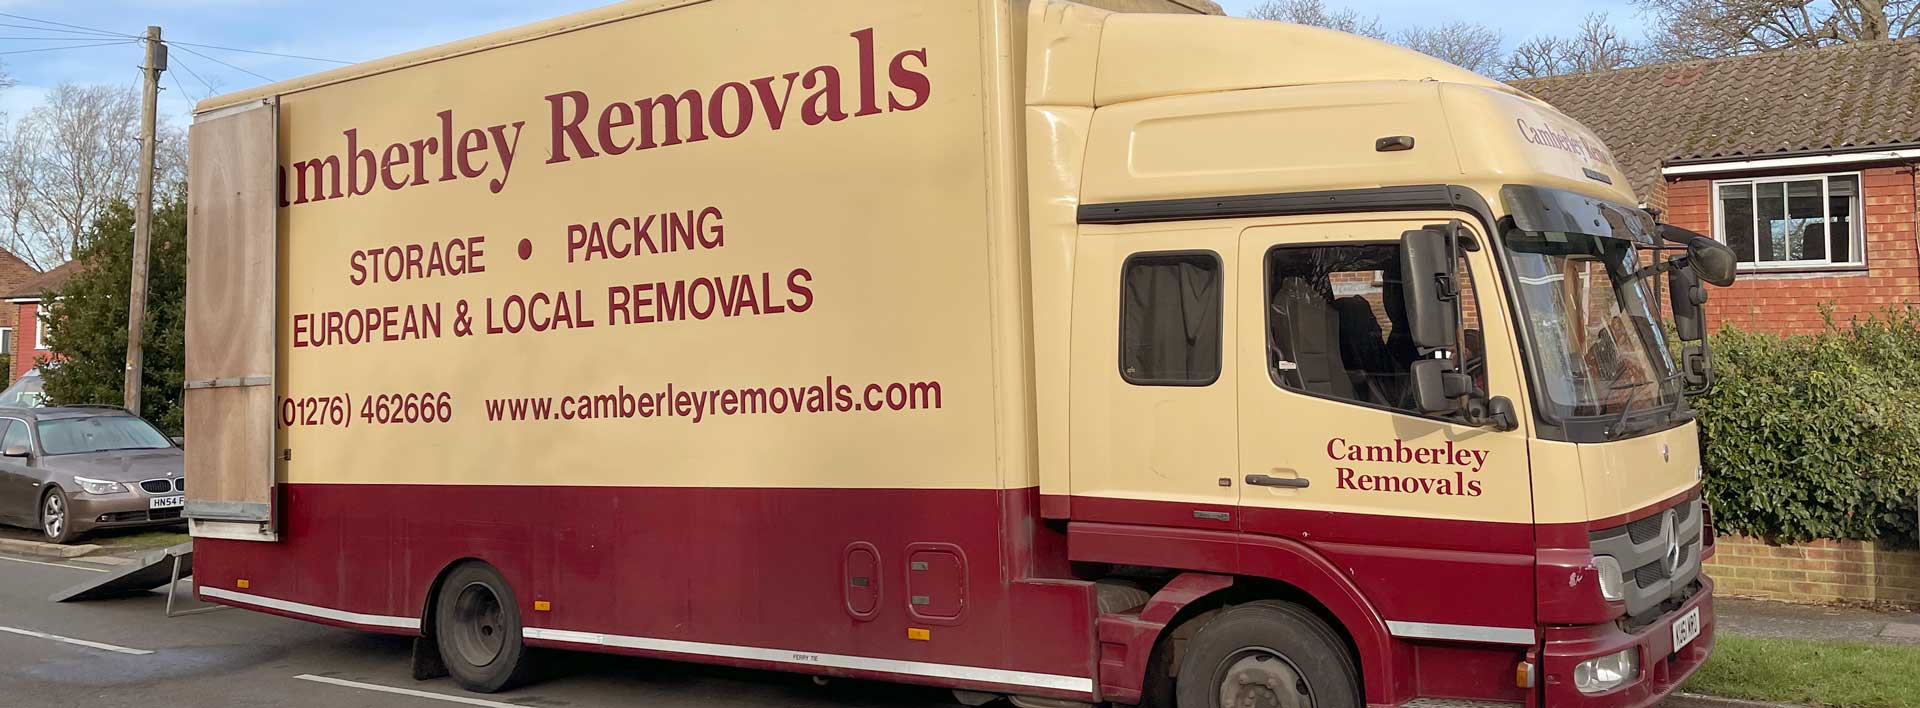 Camberley Removals vehicle being loaded on roadside